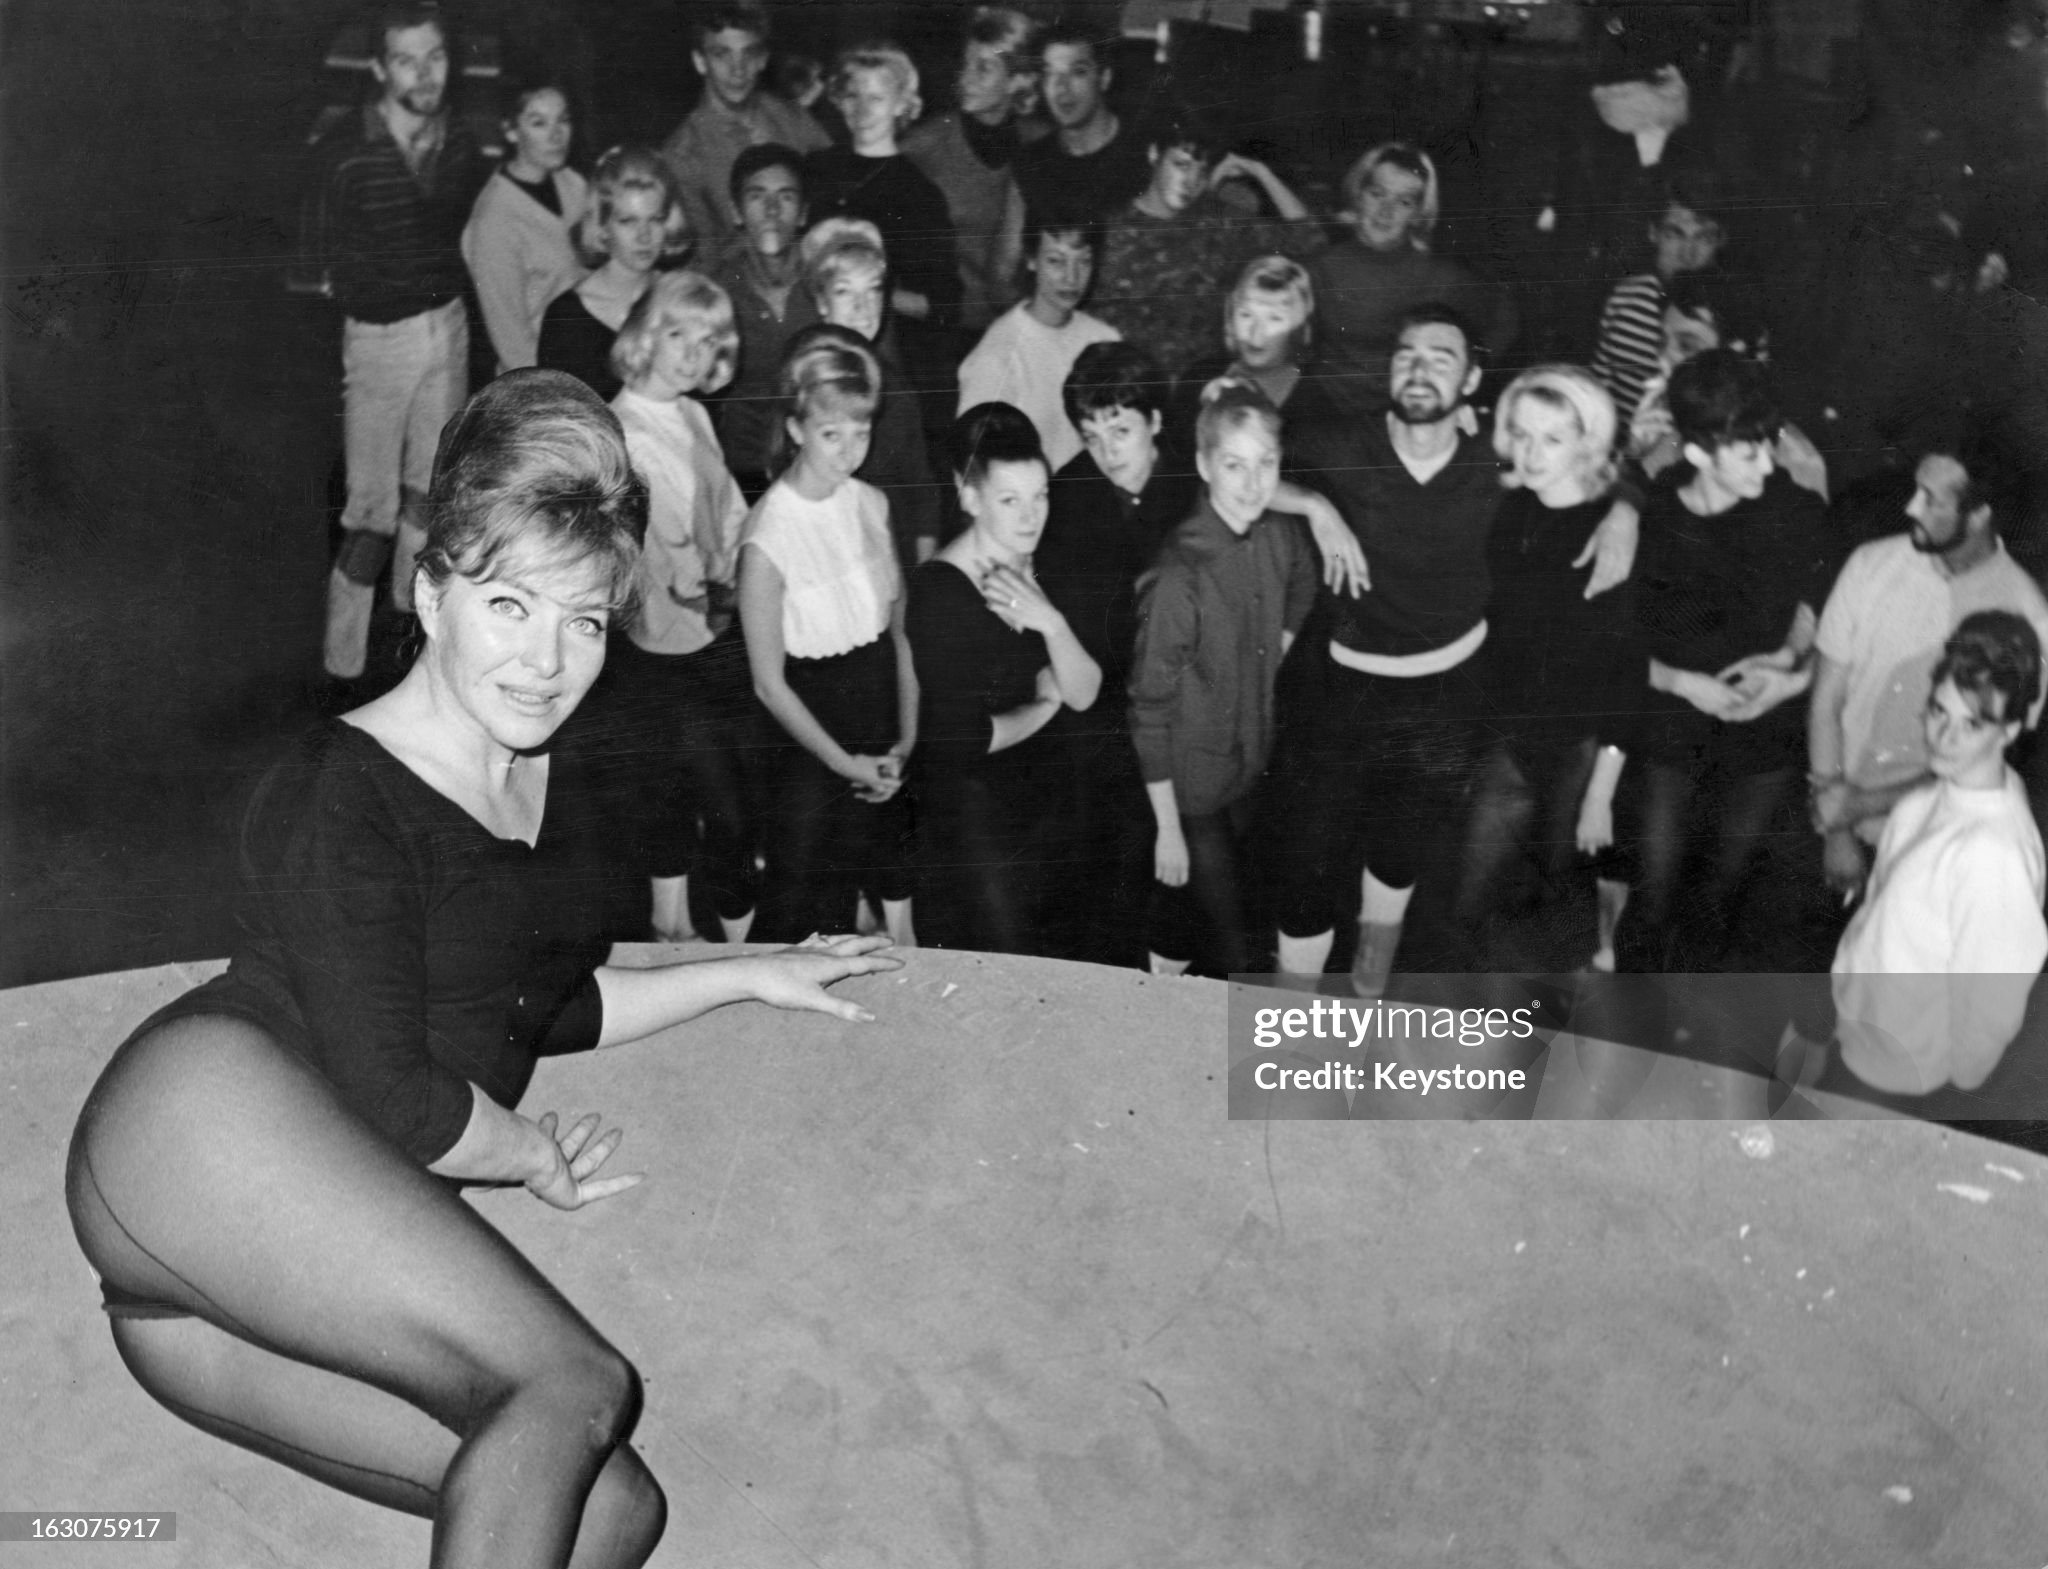 French singer and actress Line Renaud during rehearsals for her show 'Casino de Paris', in Milan on 29 November 1963. 'Casino de Paris' is to be staged at the Dunes hotel and casino in Las Vegas. 